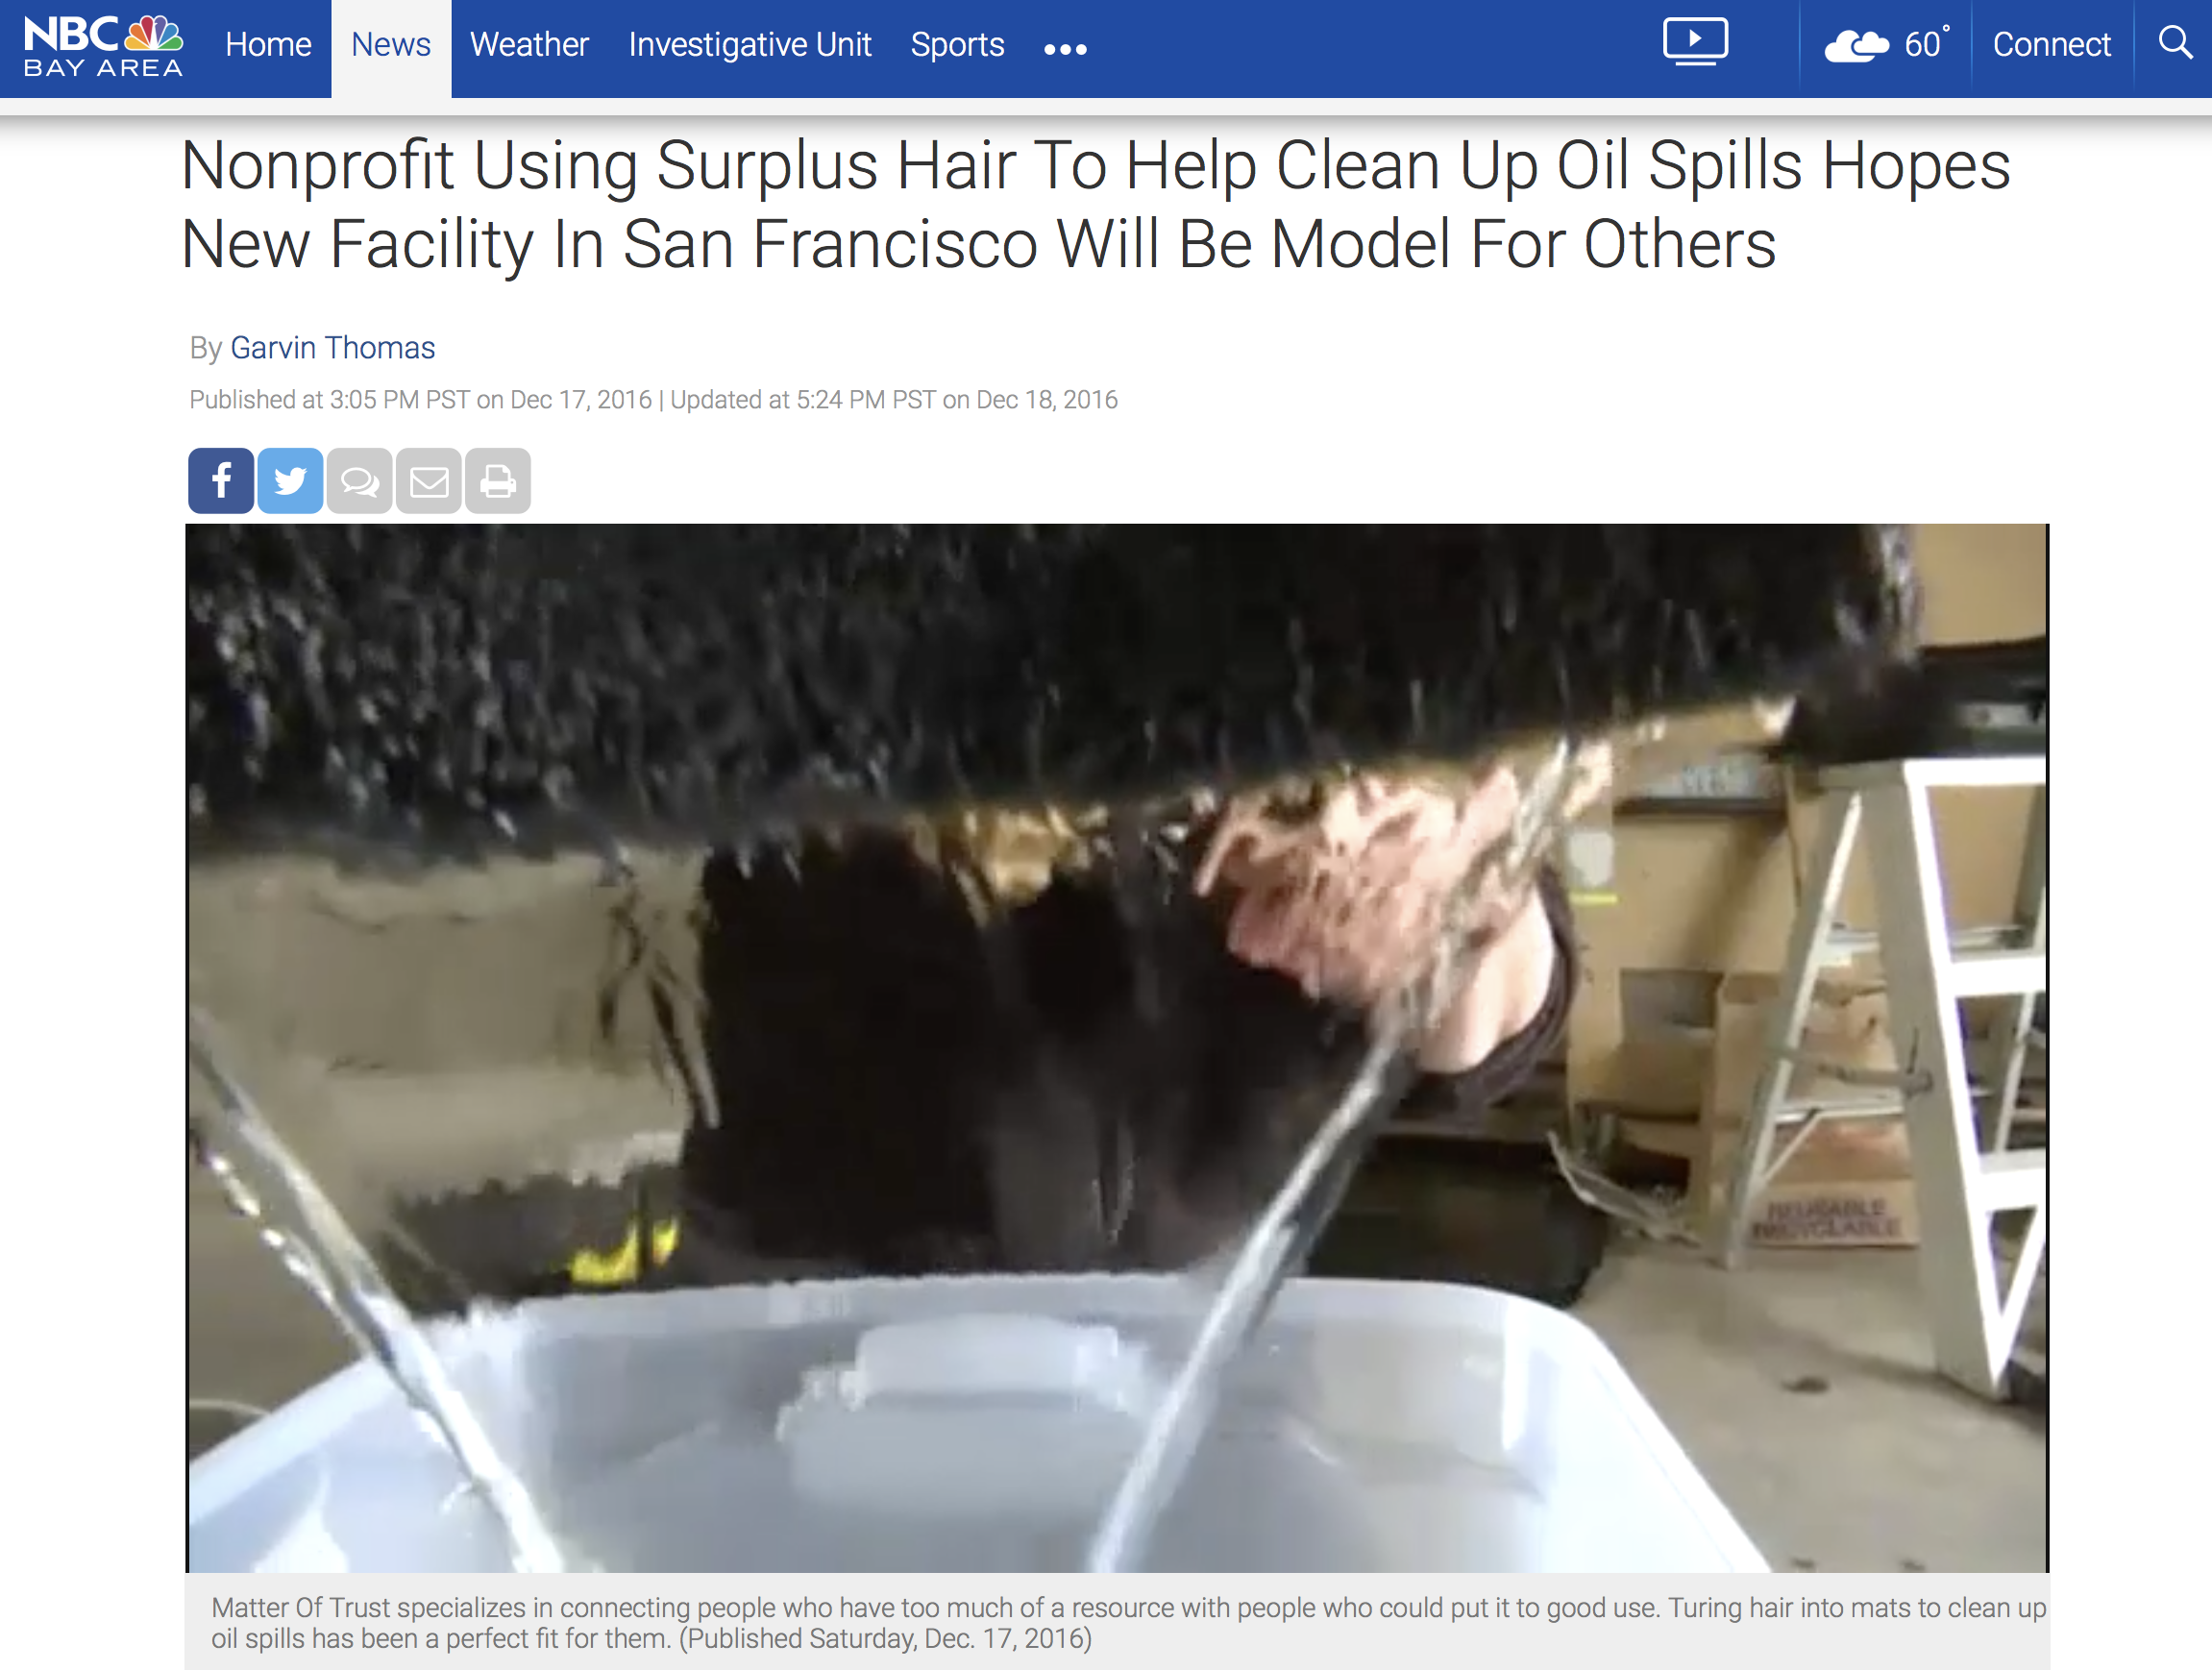 NBC BAY AREA – Nonprofit Using Surplus Hair To Help Clean Up Oil Spills Hopes New Facility In San Francisco Will Be Model For Others